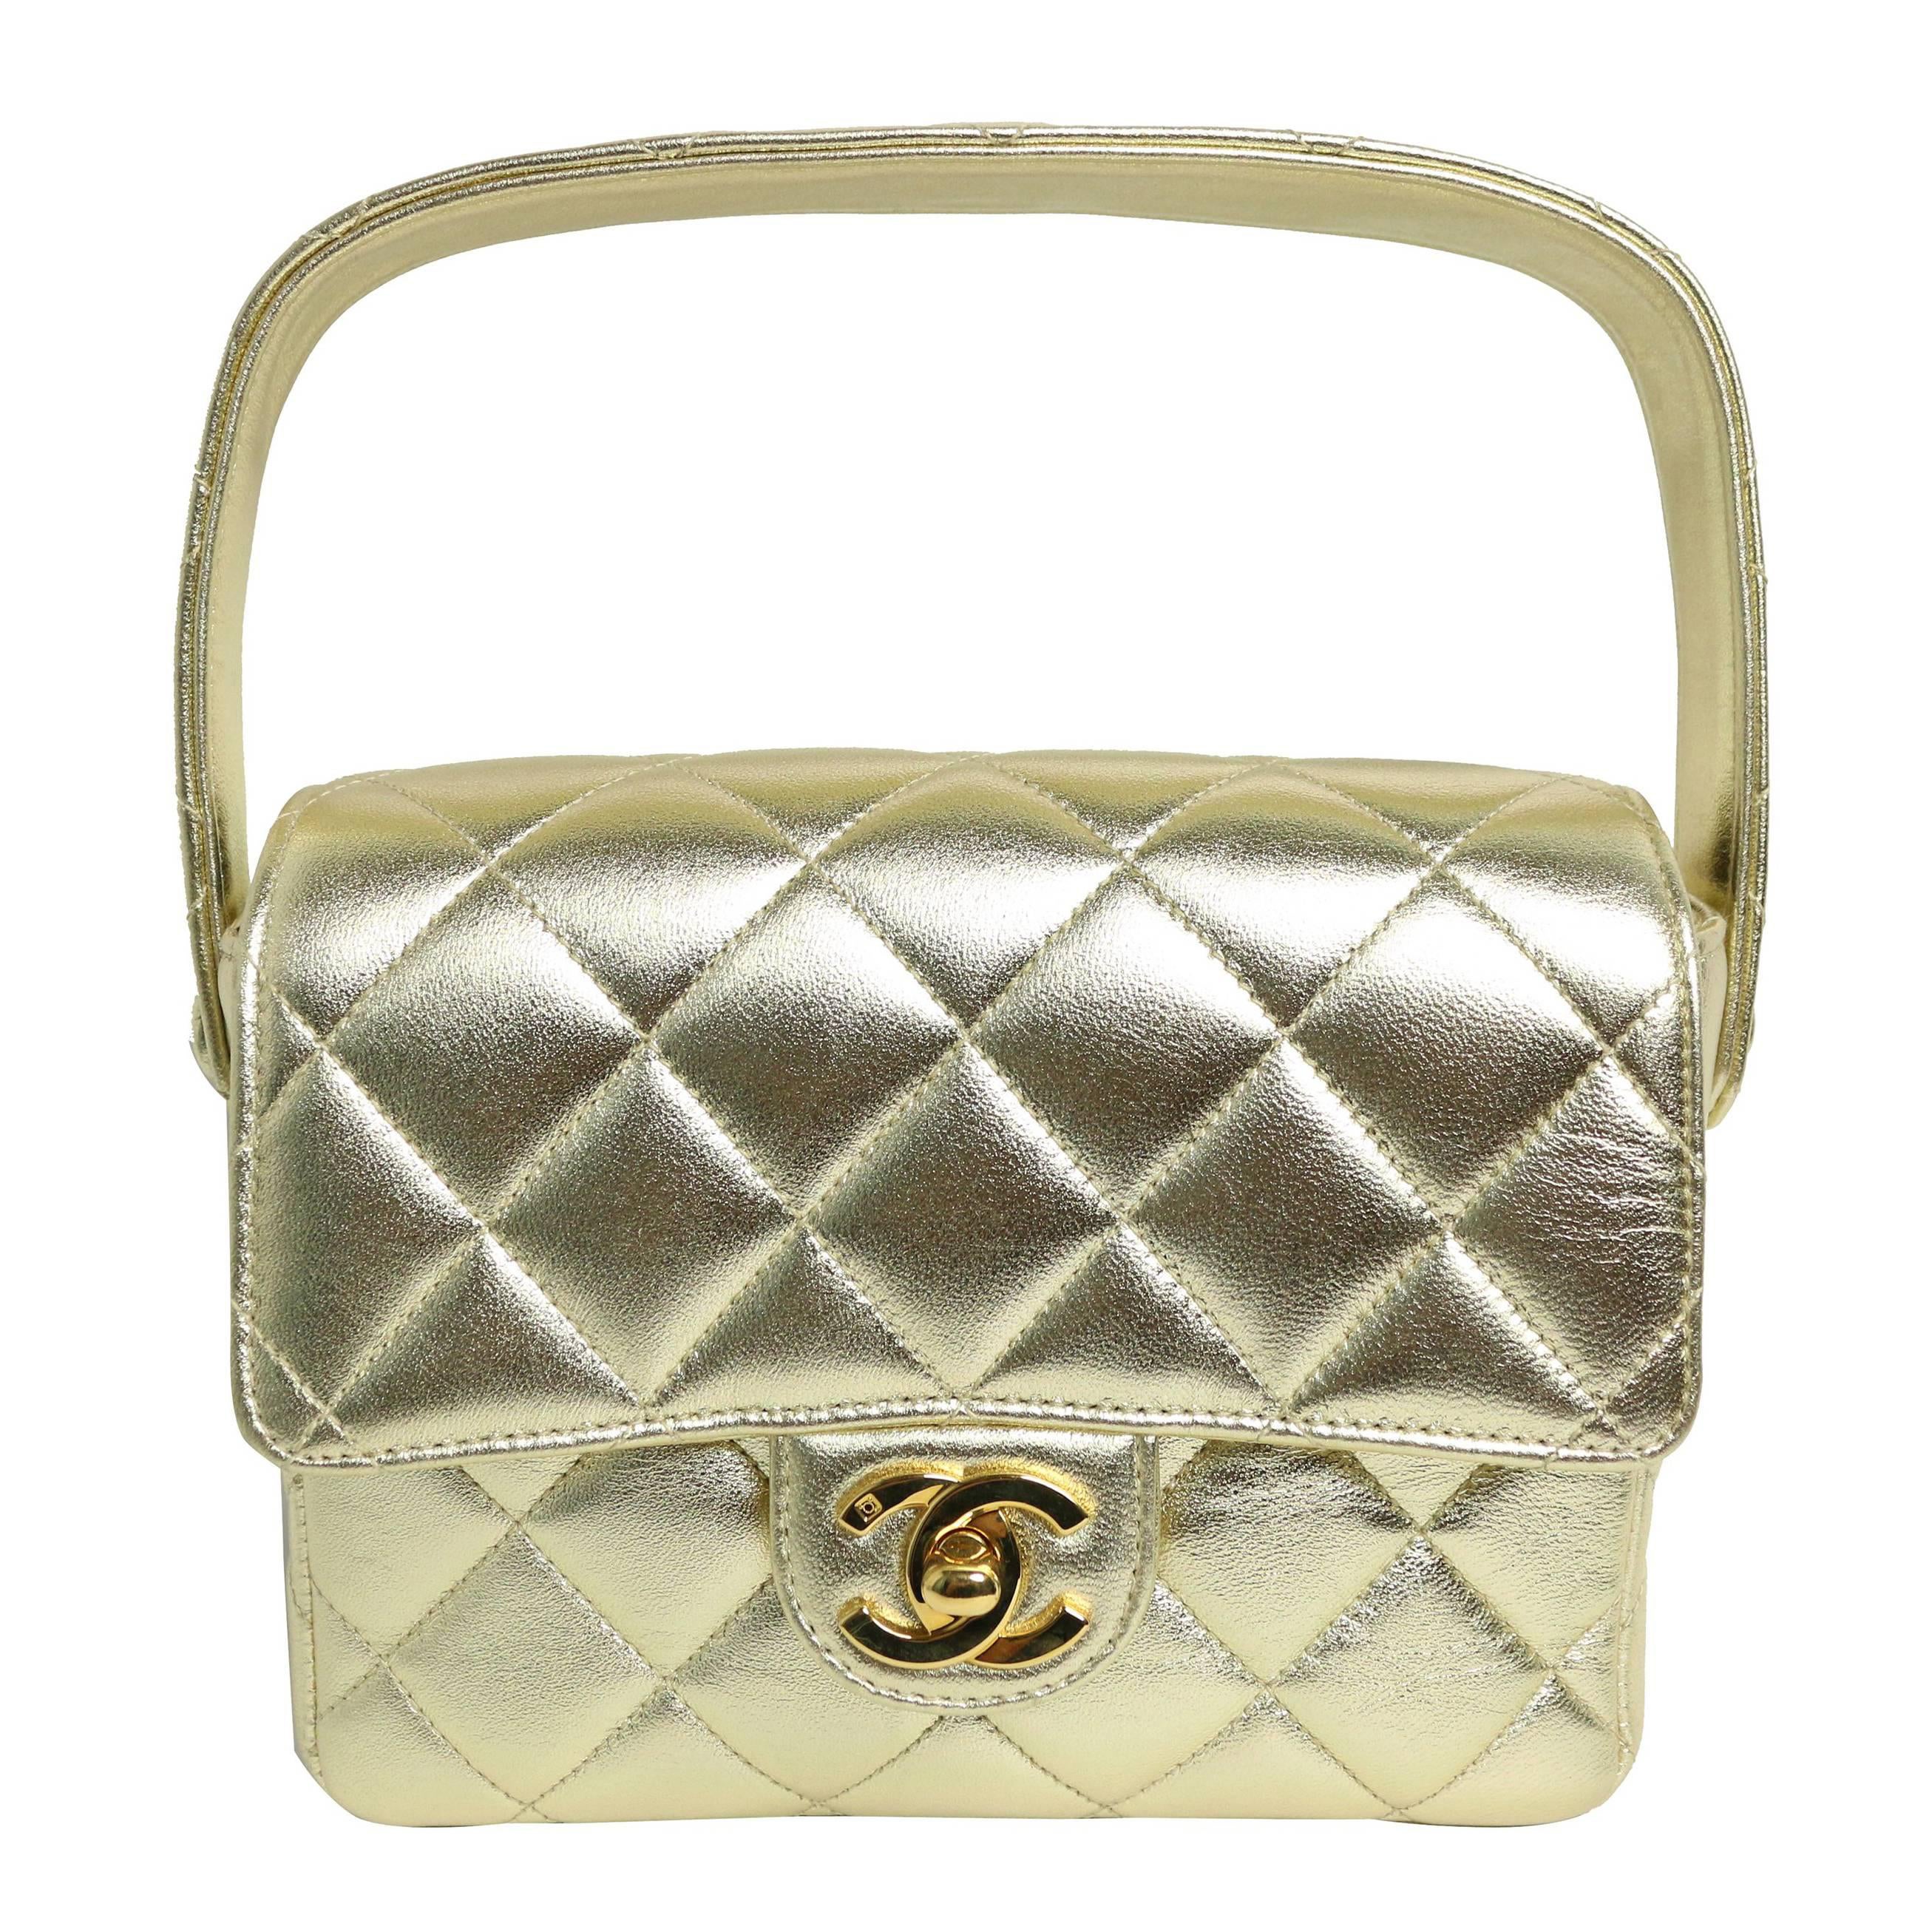 Chanel Square Mini Gold Metallic Lambskin Quilted  Flap Handbag   For Sale